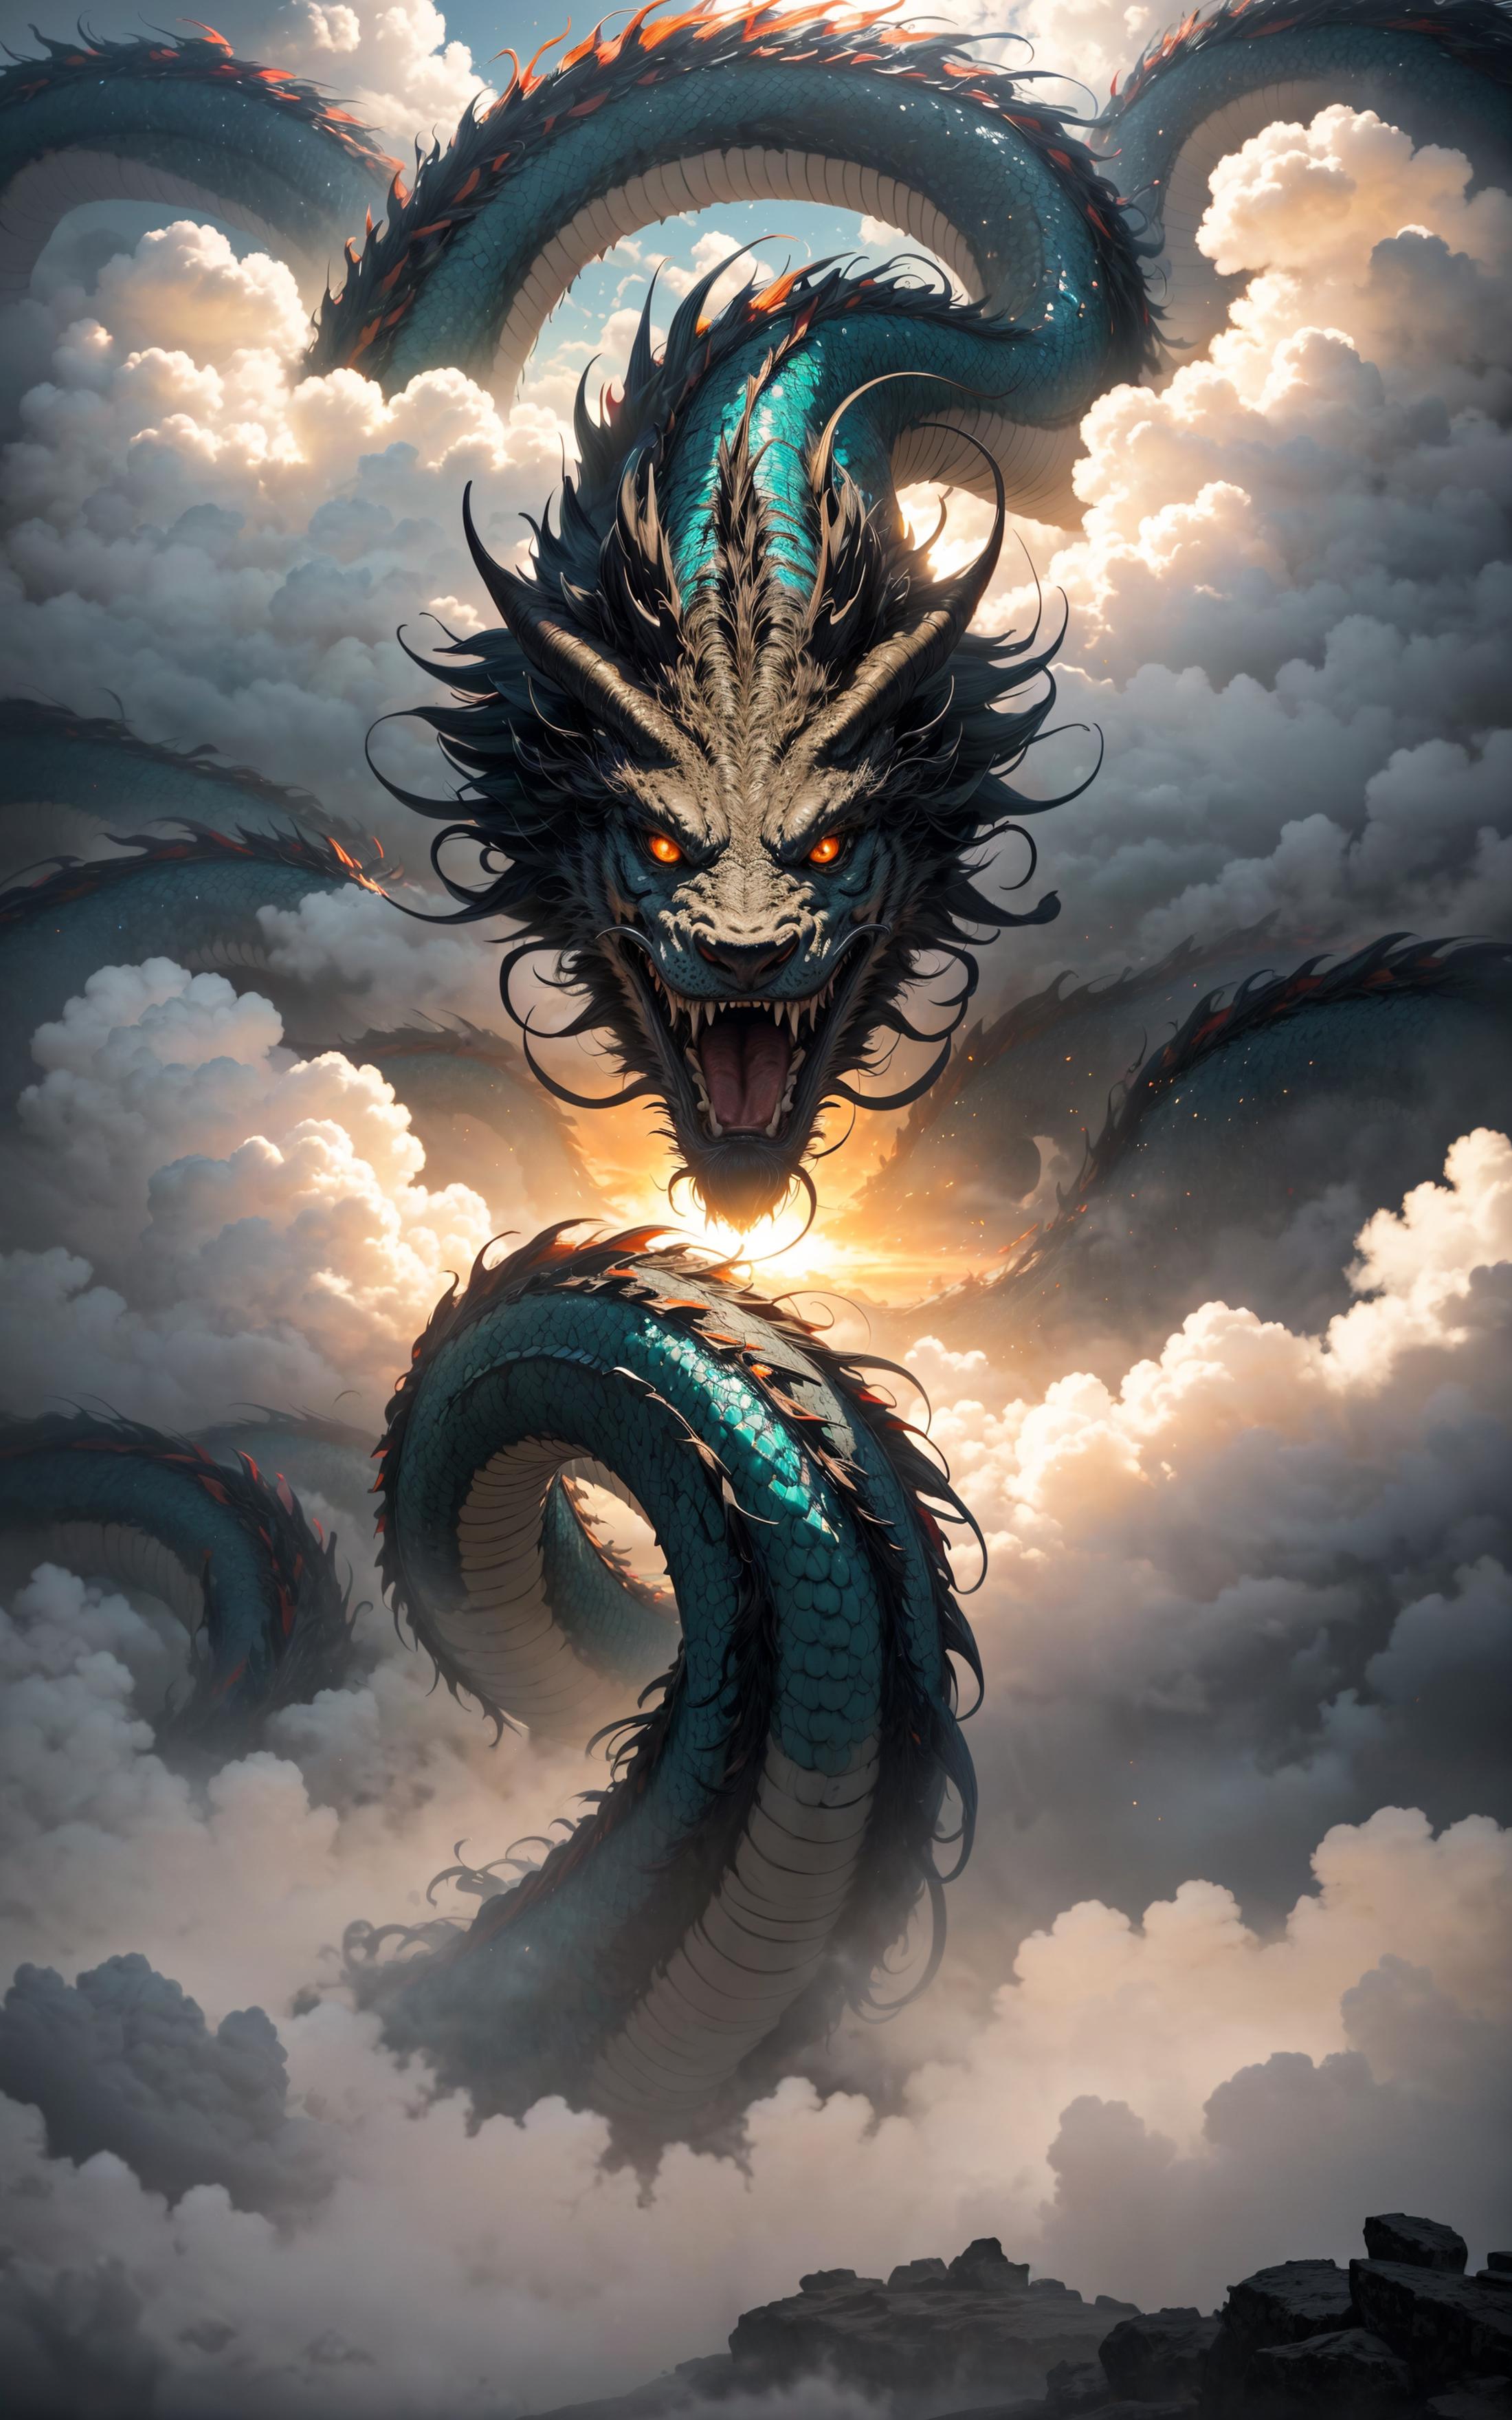 A blue and white dragon with many horns and a scary face in a cloudy sky.